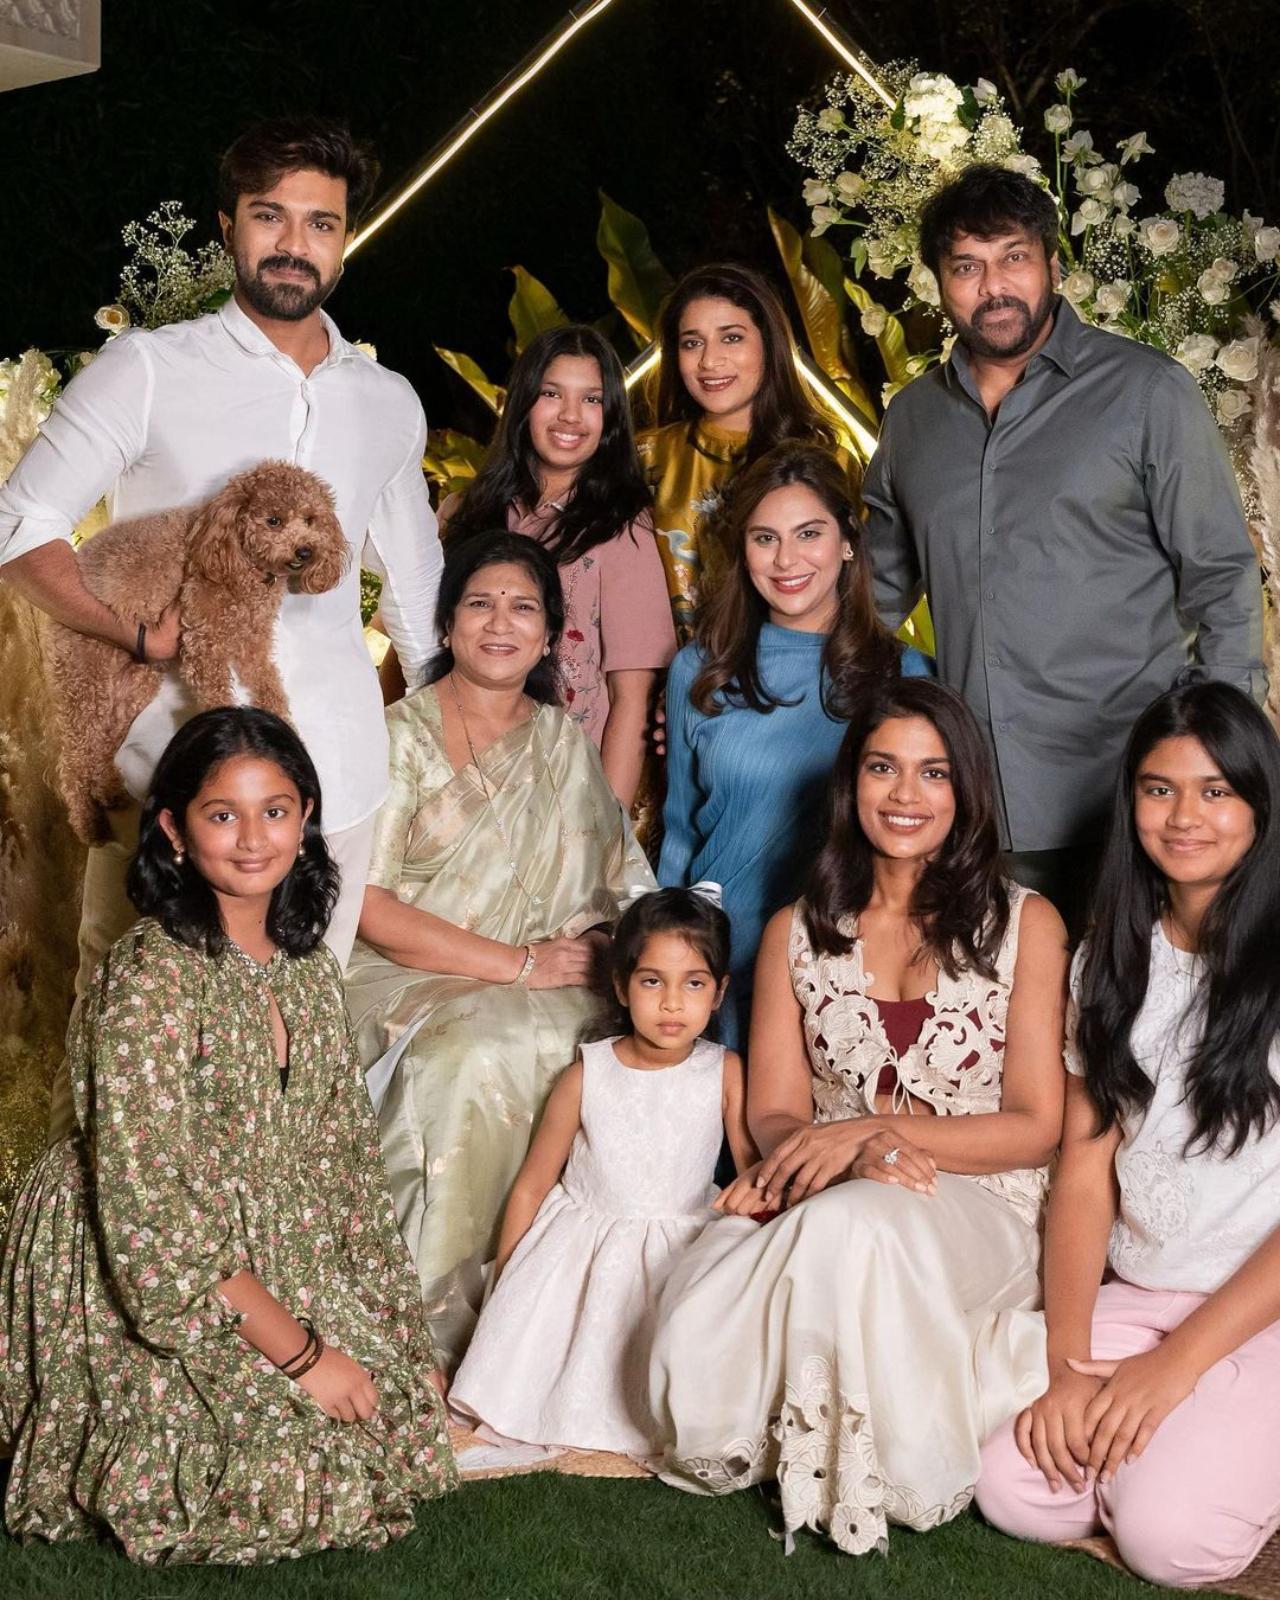 Ram Charan and Upasana set couple and parent goals from the very beginning by being transparent about their journey of parenthood. They also threw baby showers in Dubai and their home city of Hyderabad - the pictures of which took the Internet by storm